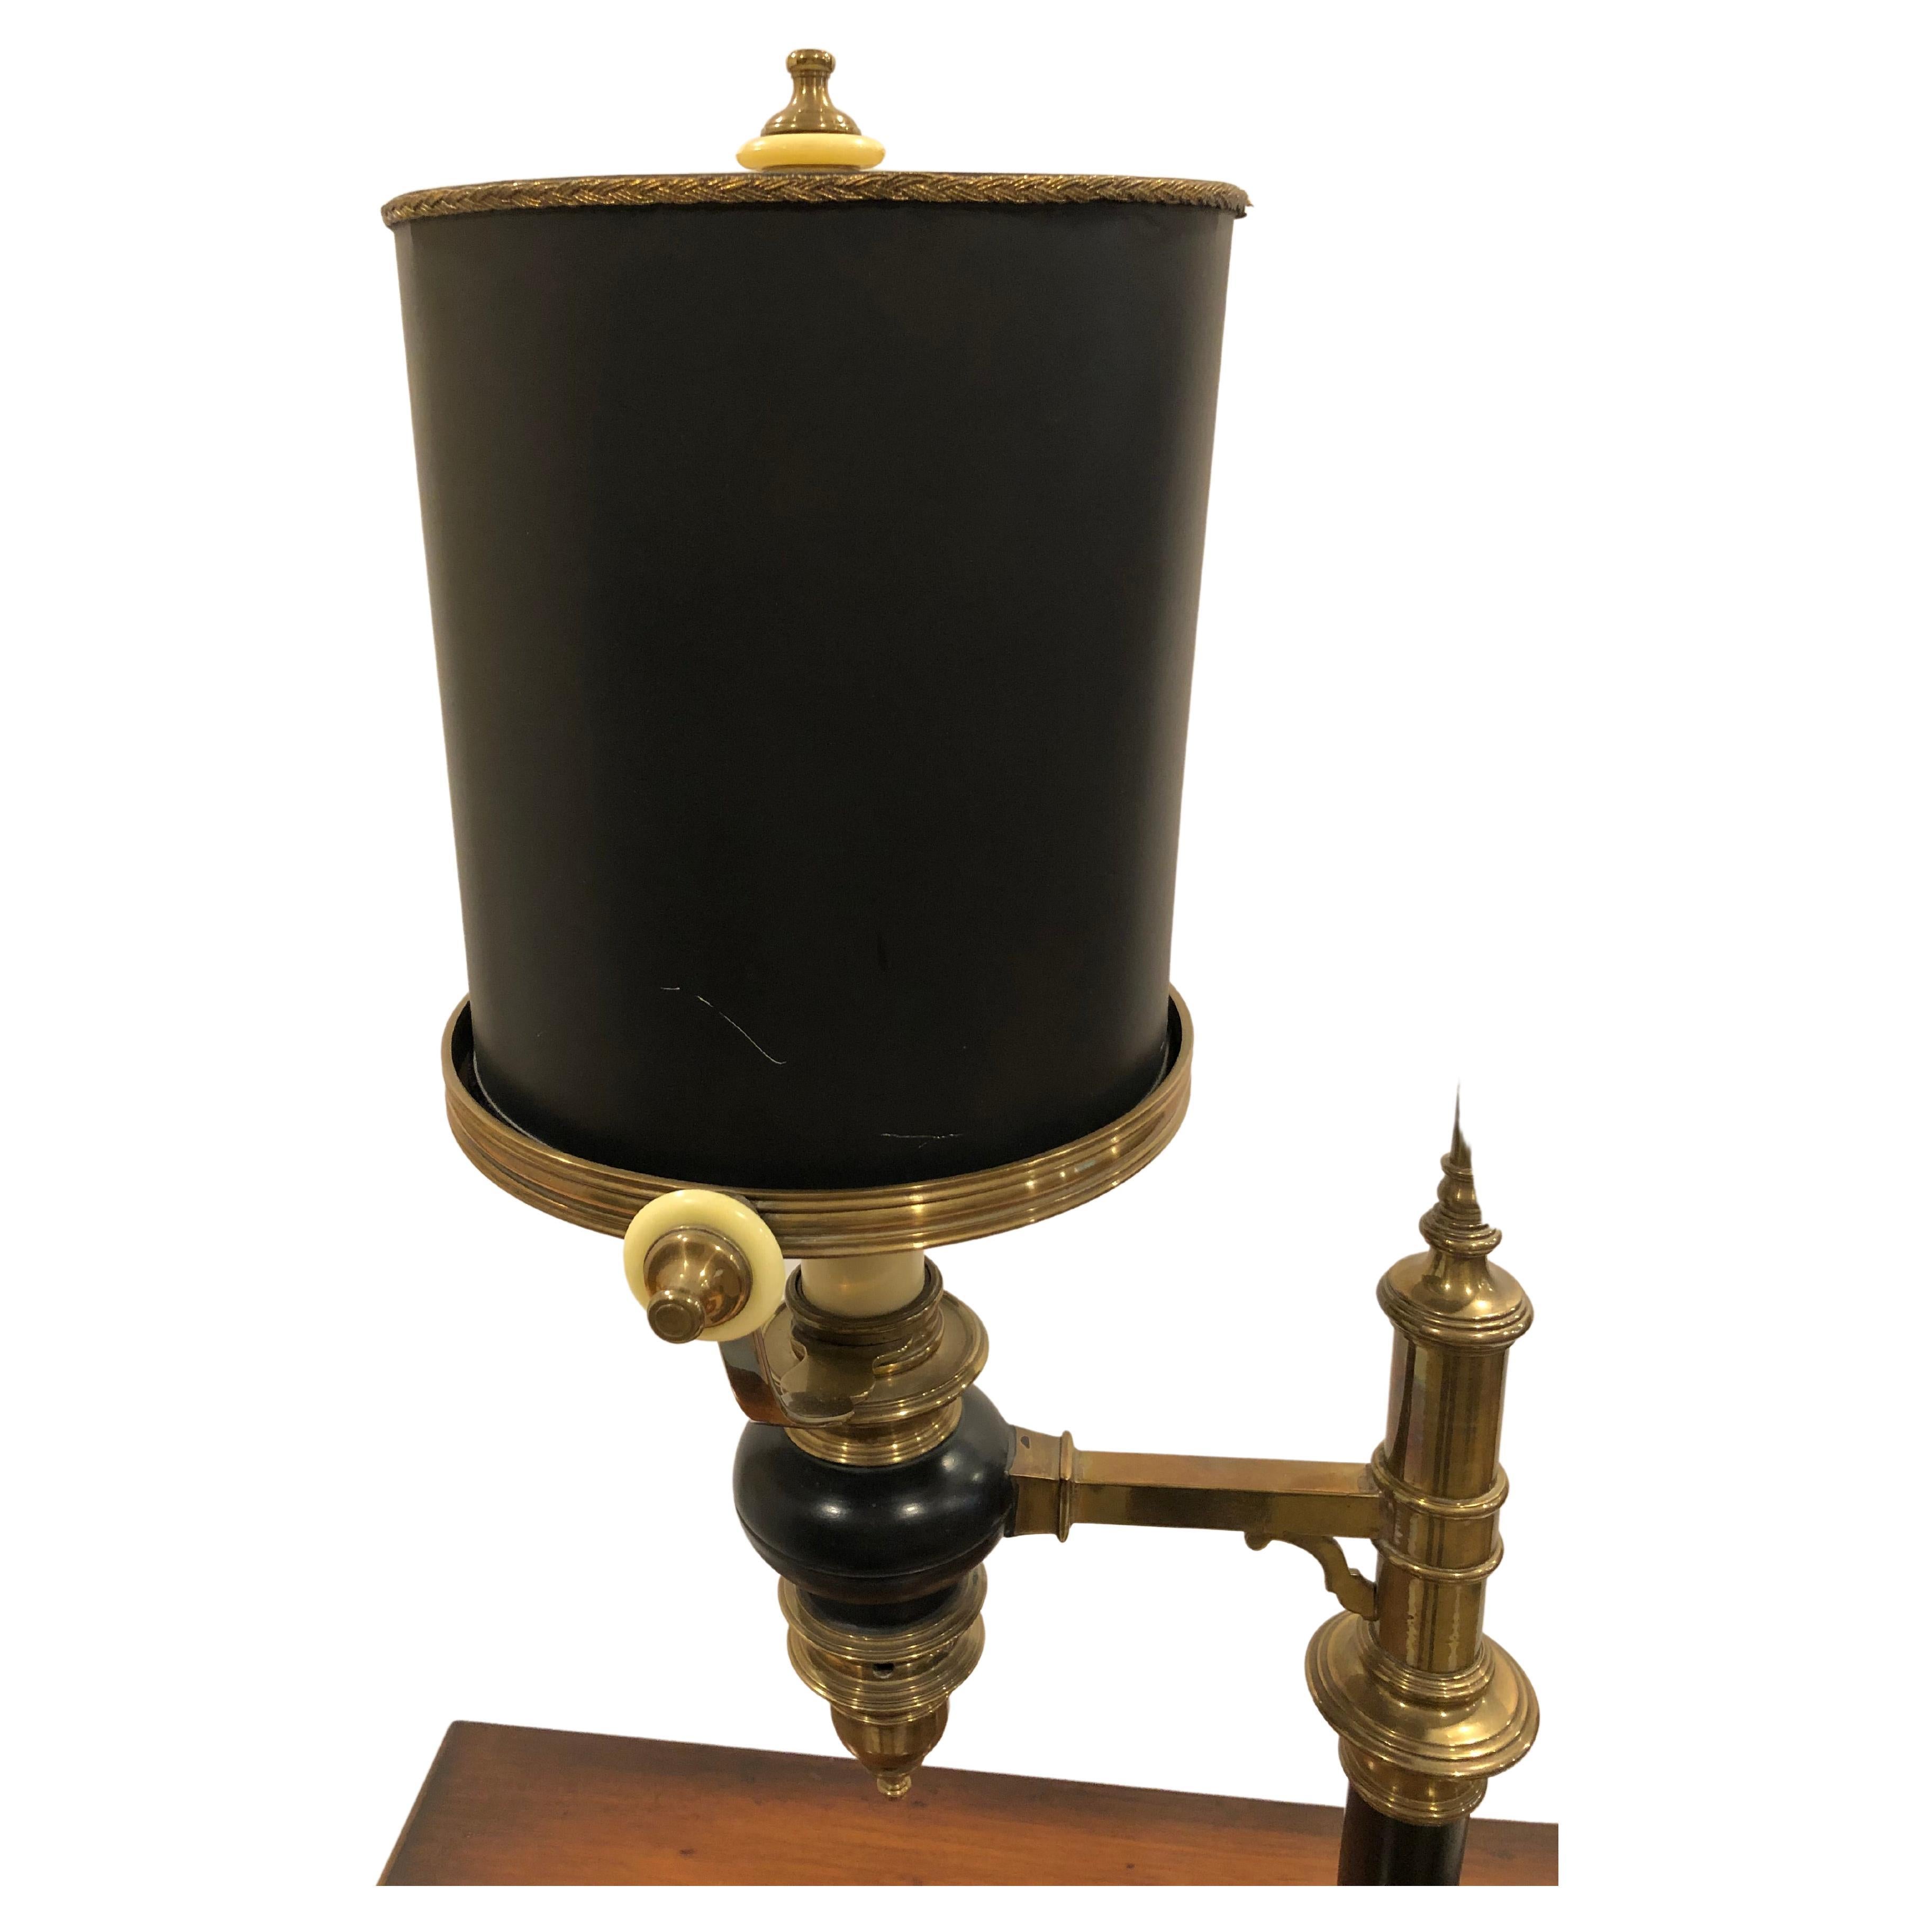 Wonderful character rich desk or table lamp by Chapman having a mix of brass and black painted metal, enamel white knobs and a fabulous cylindrical shaped shade.